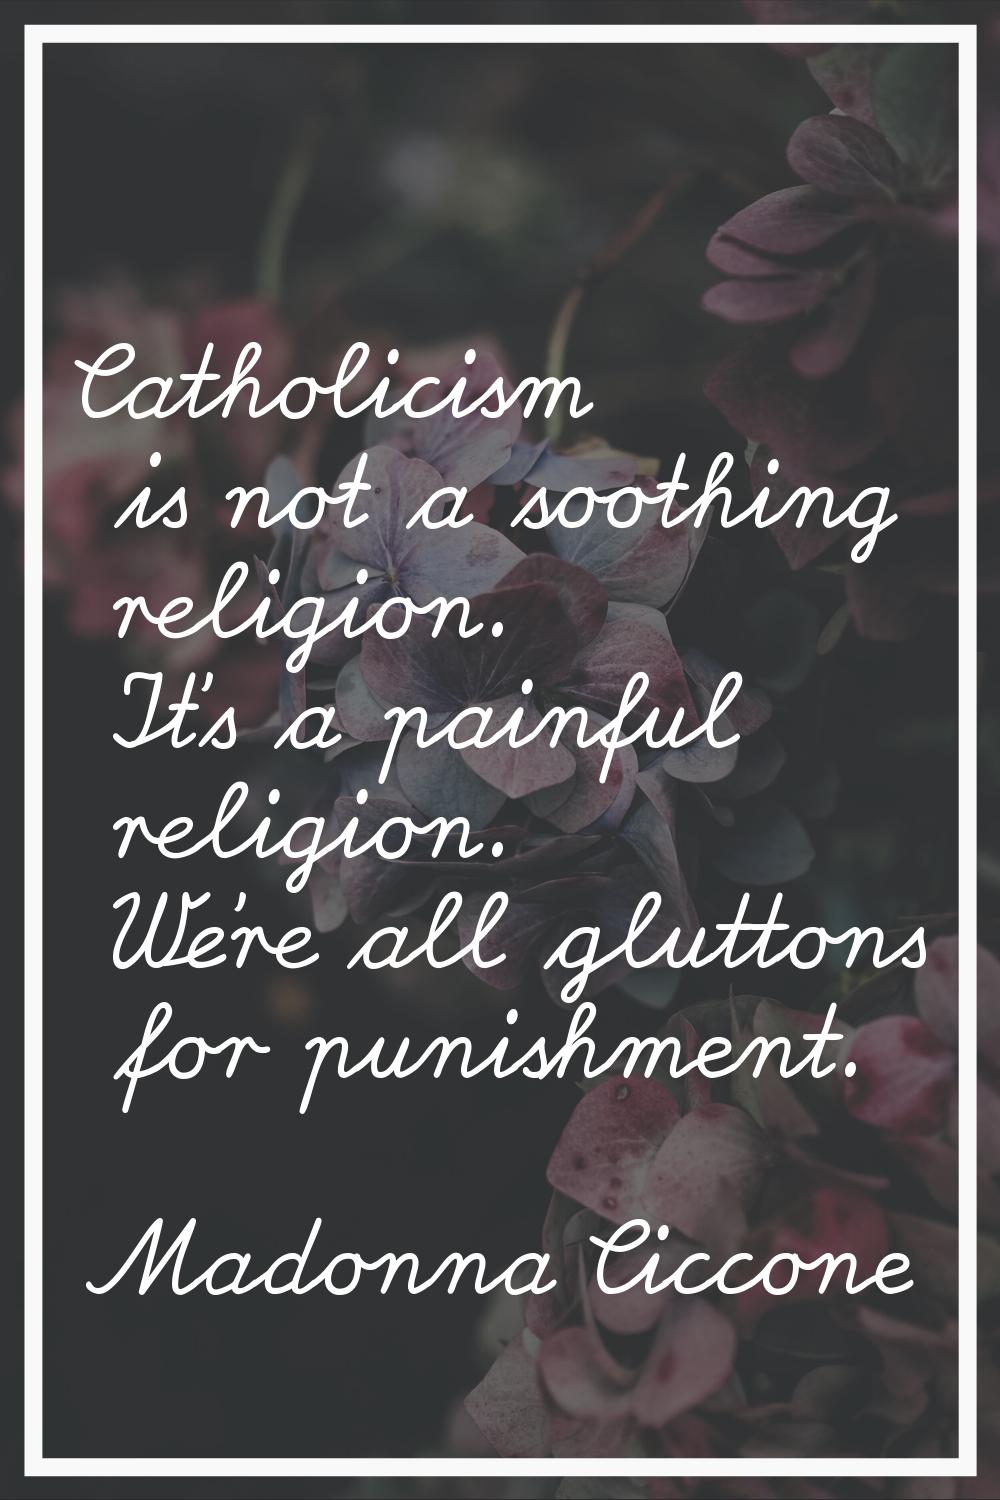 Catholicism is not a soothing religion. It's a painful religion. We're all gluttons for punishment.